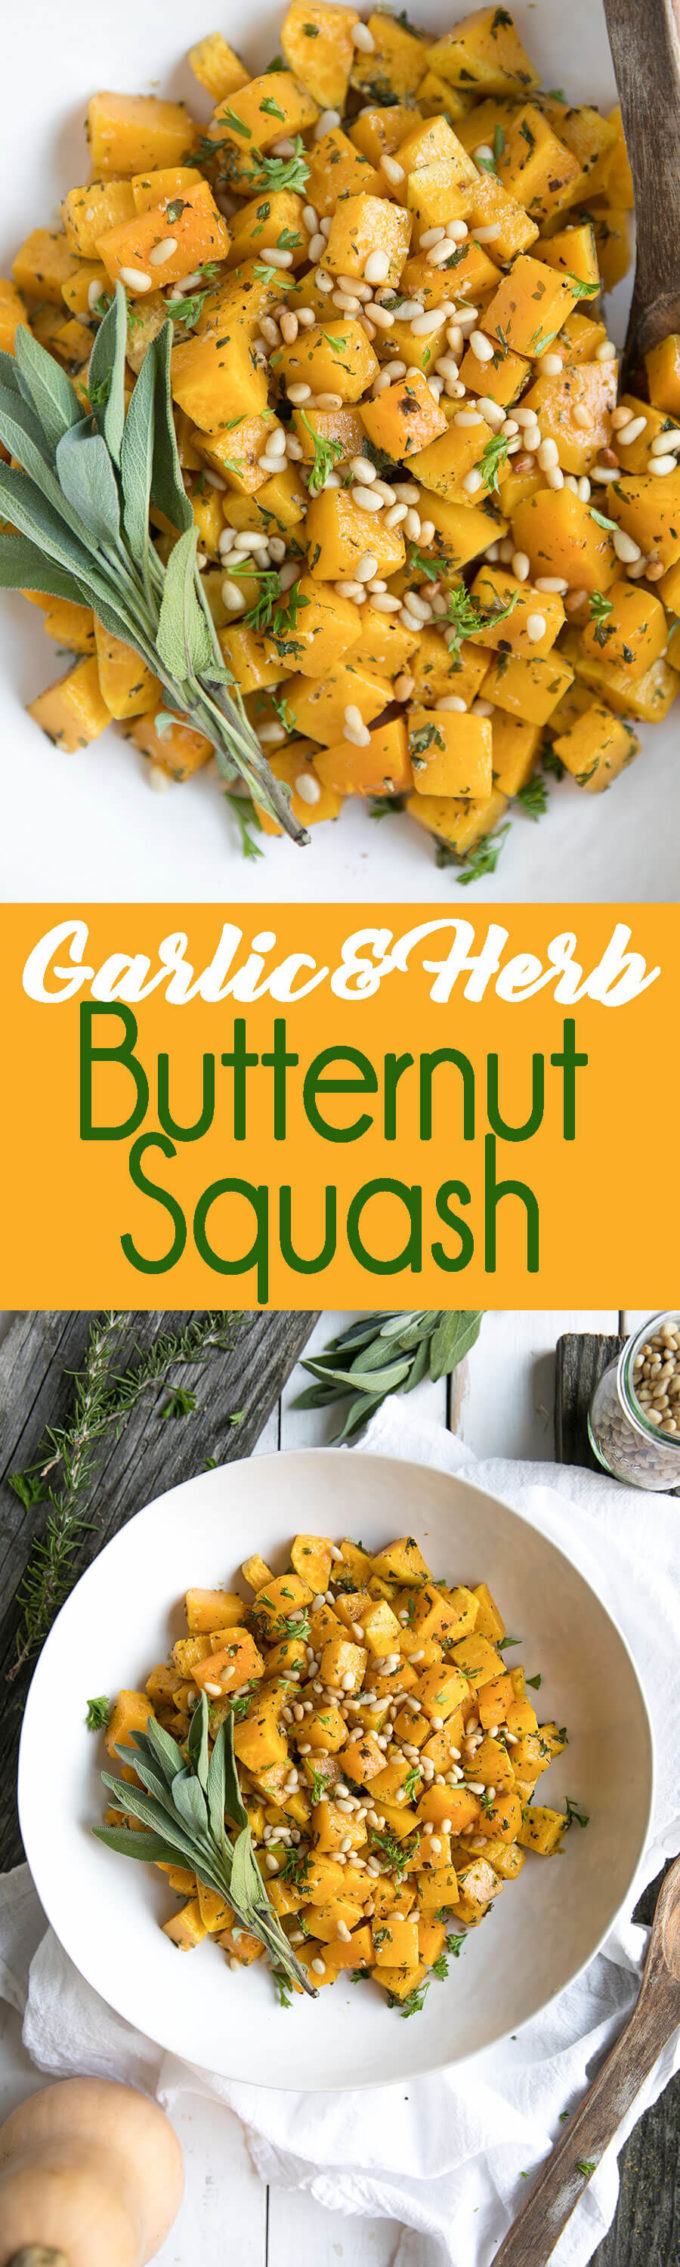 Garlic herb roasted butternut squash, and easy side with so much flavor and only 5 ingredients